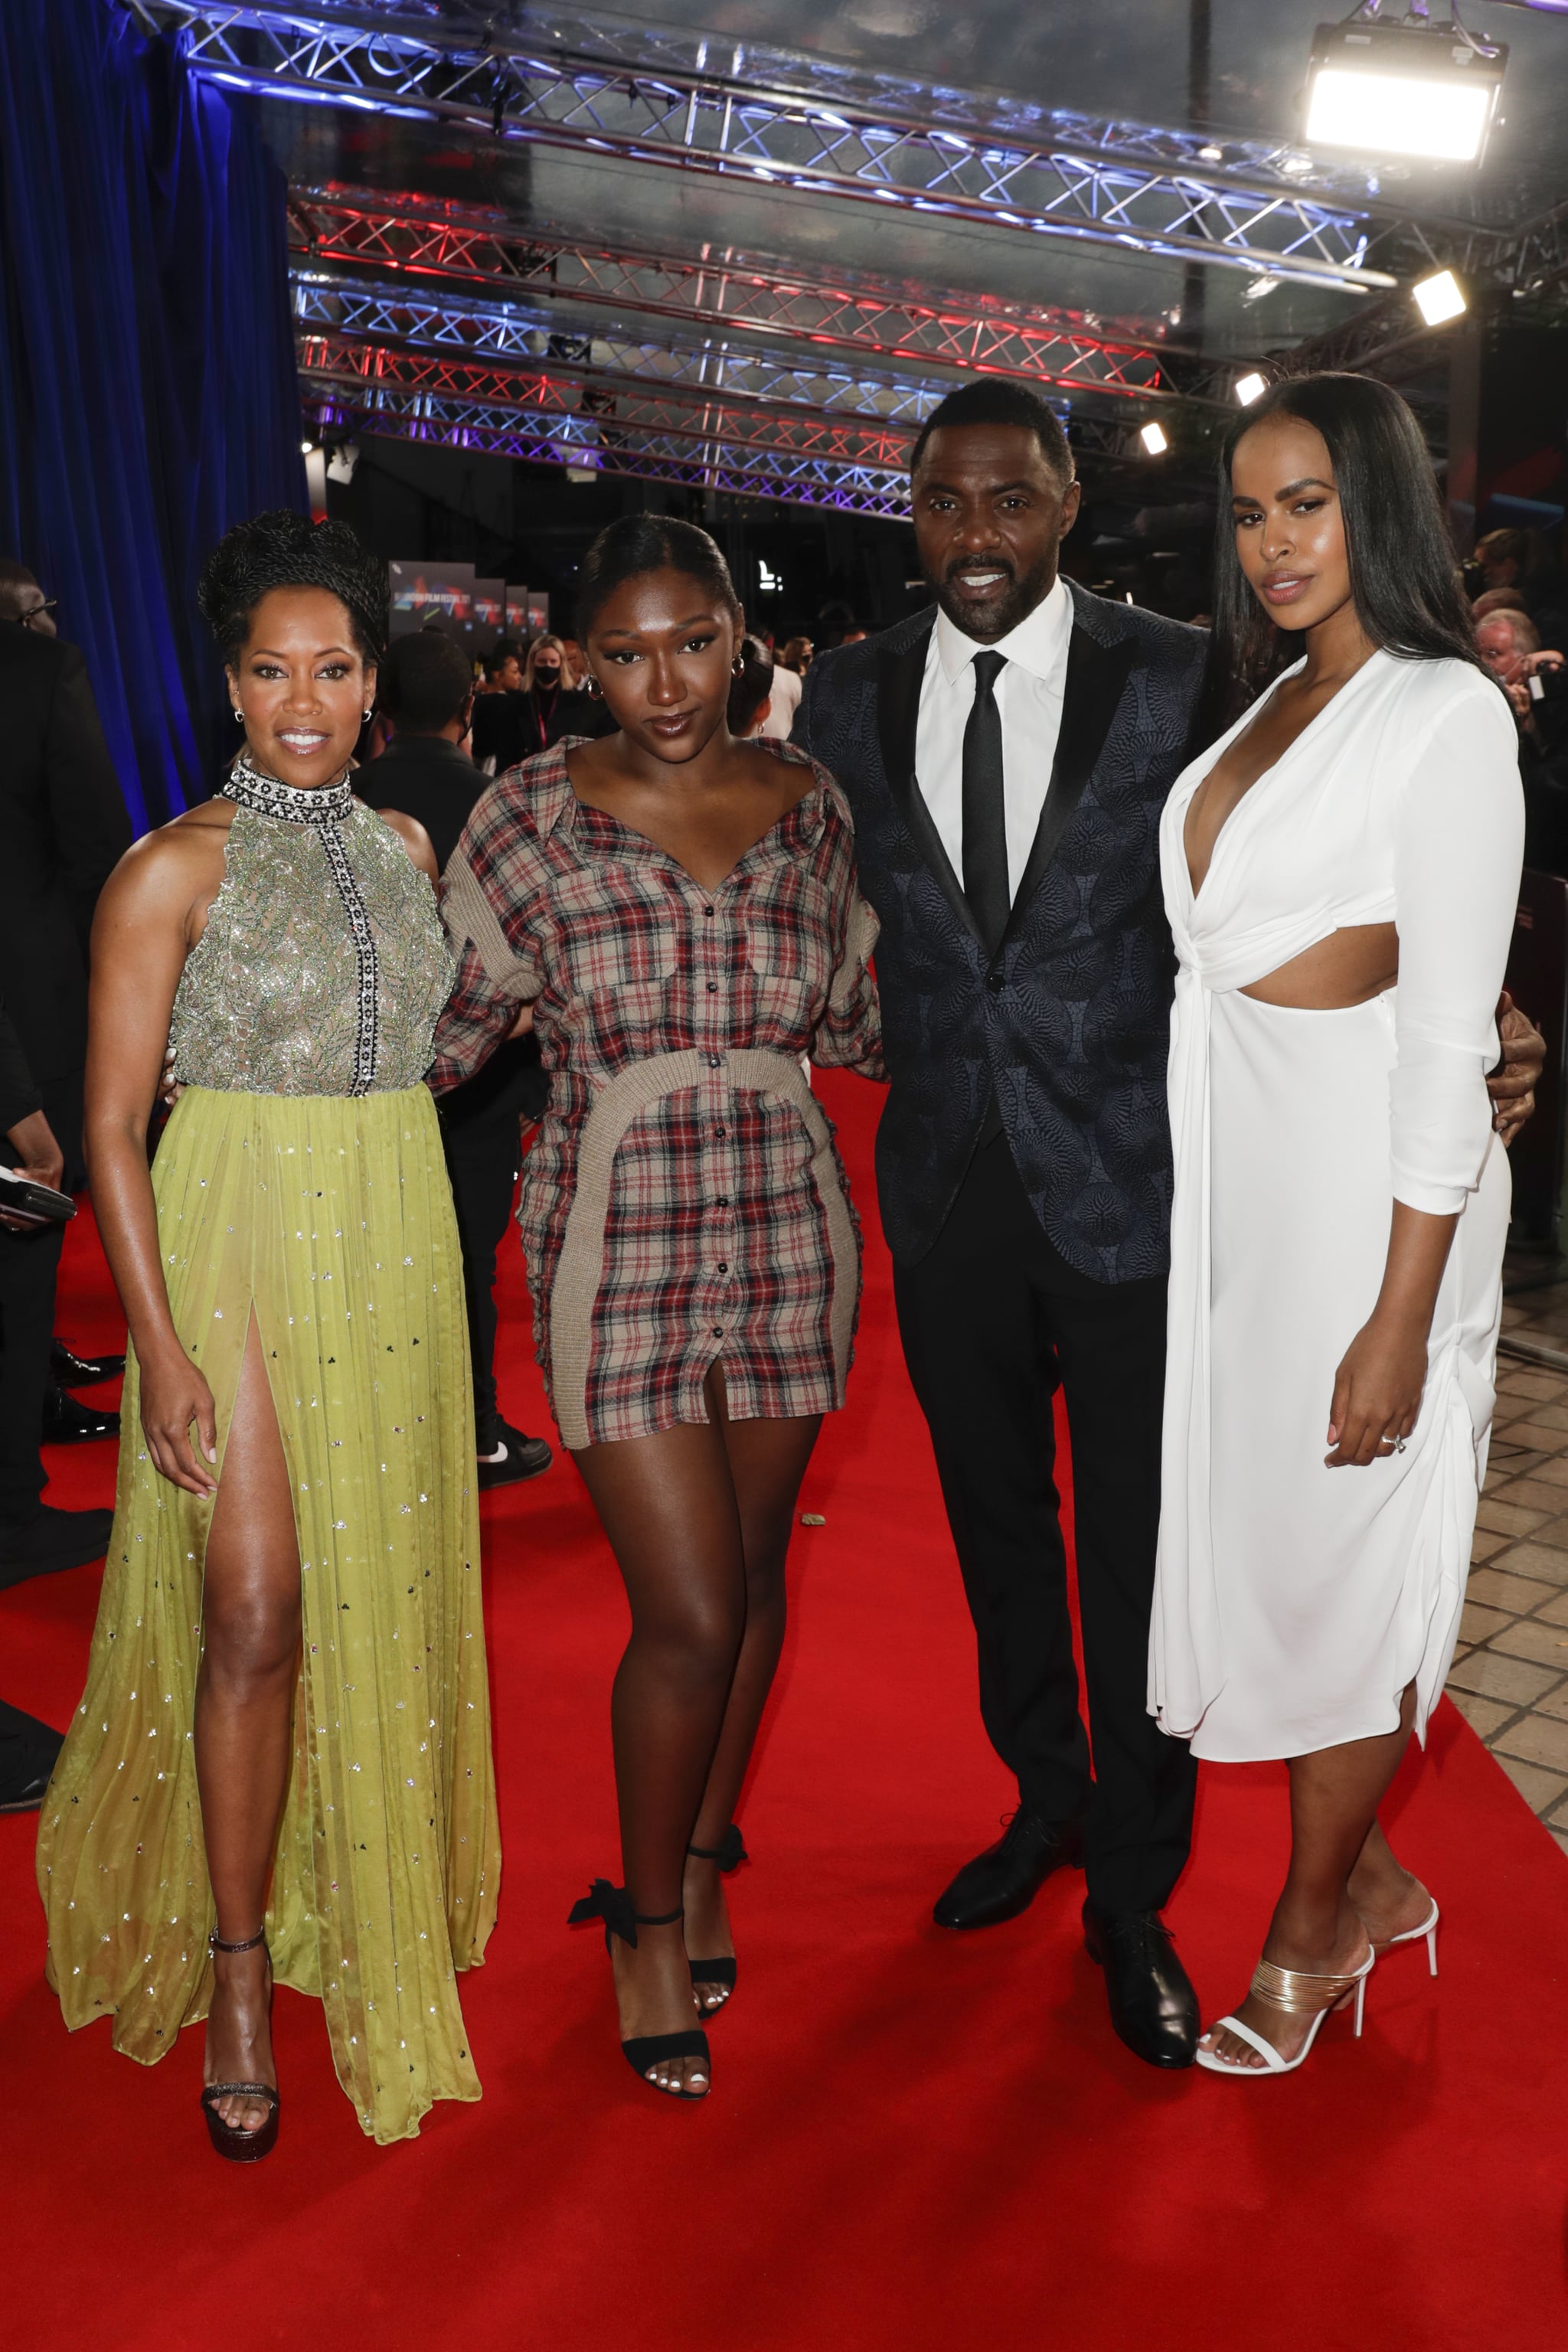 Idris Elba Brings Family to the Harder They Fall Premiere